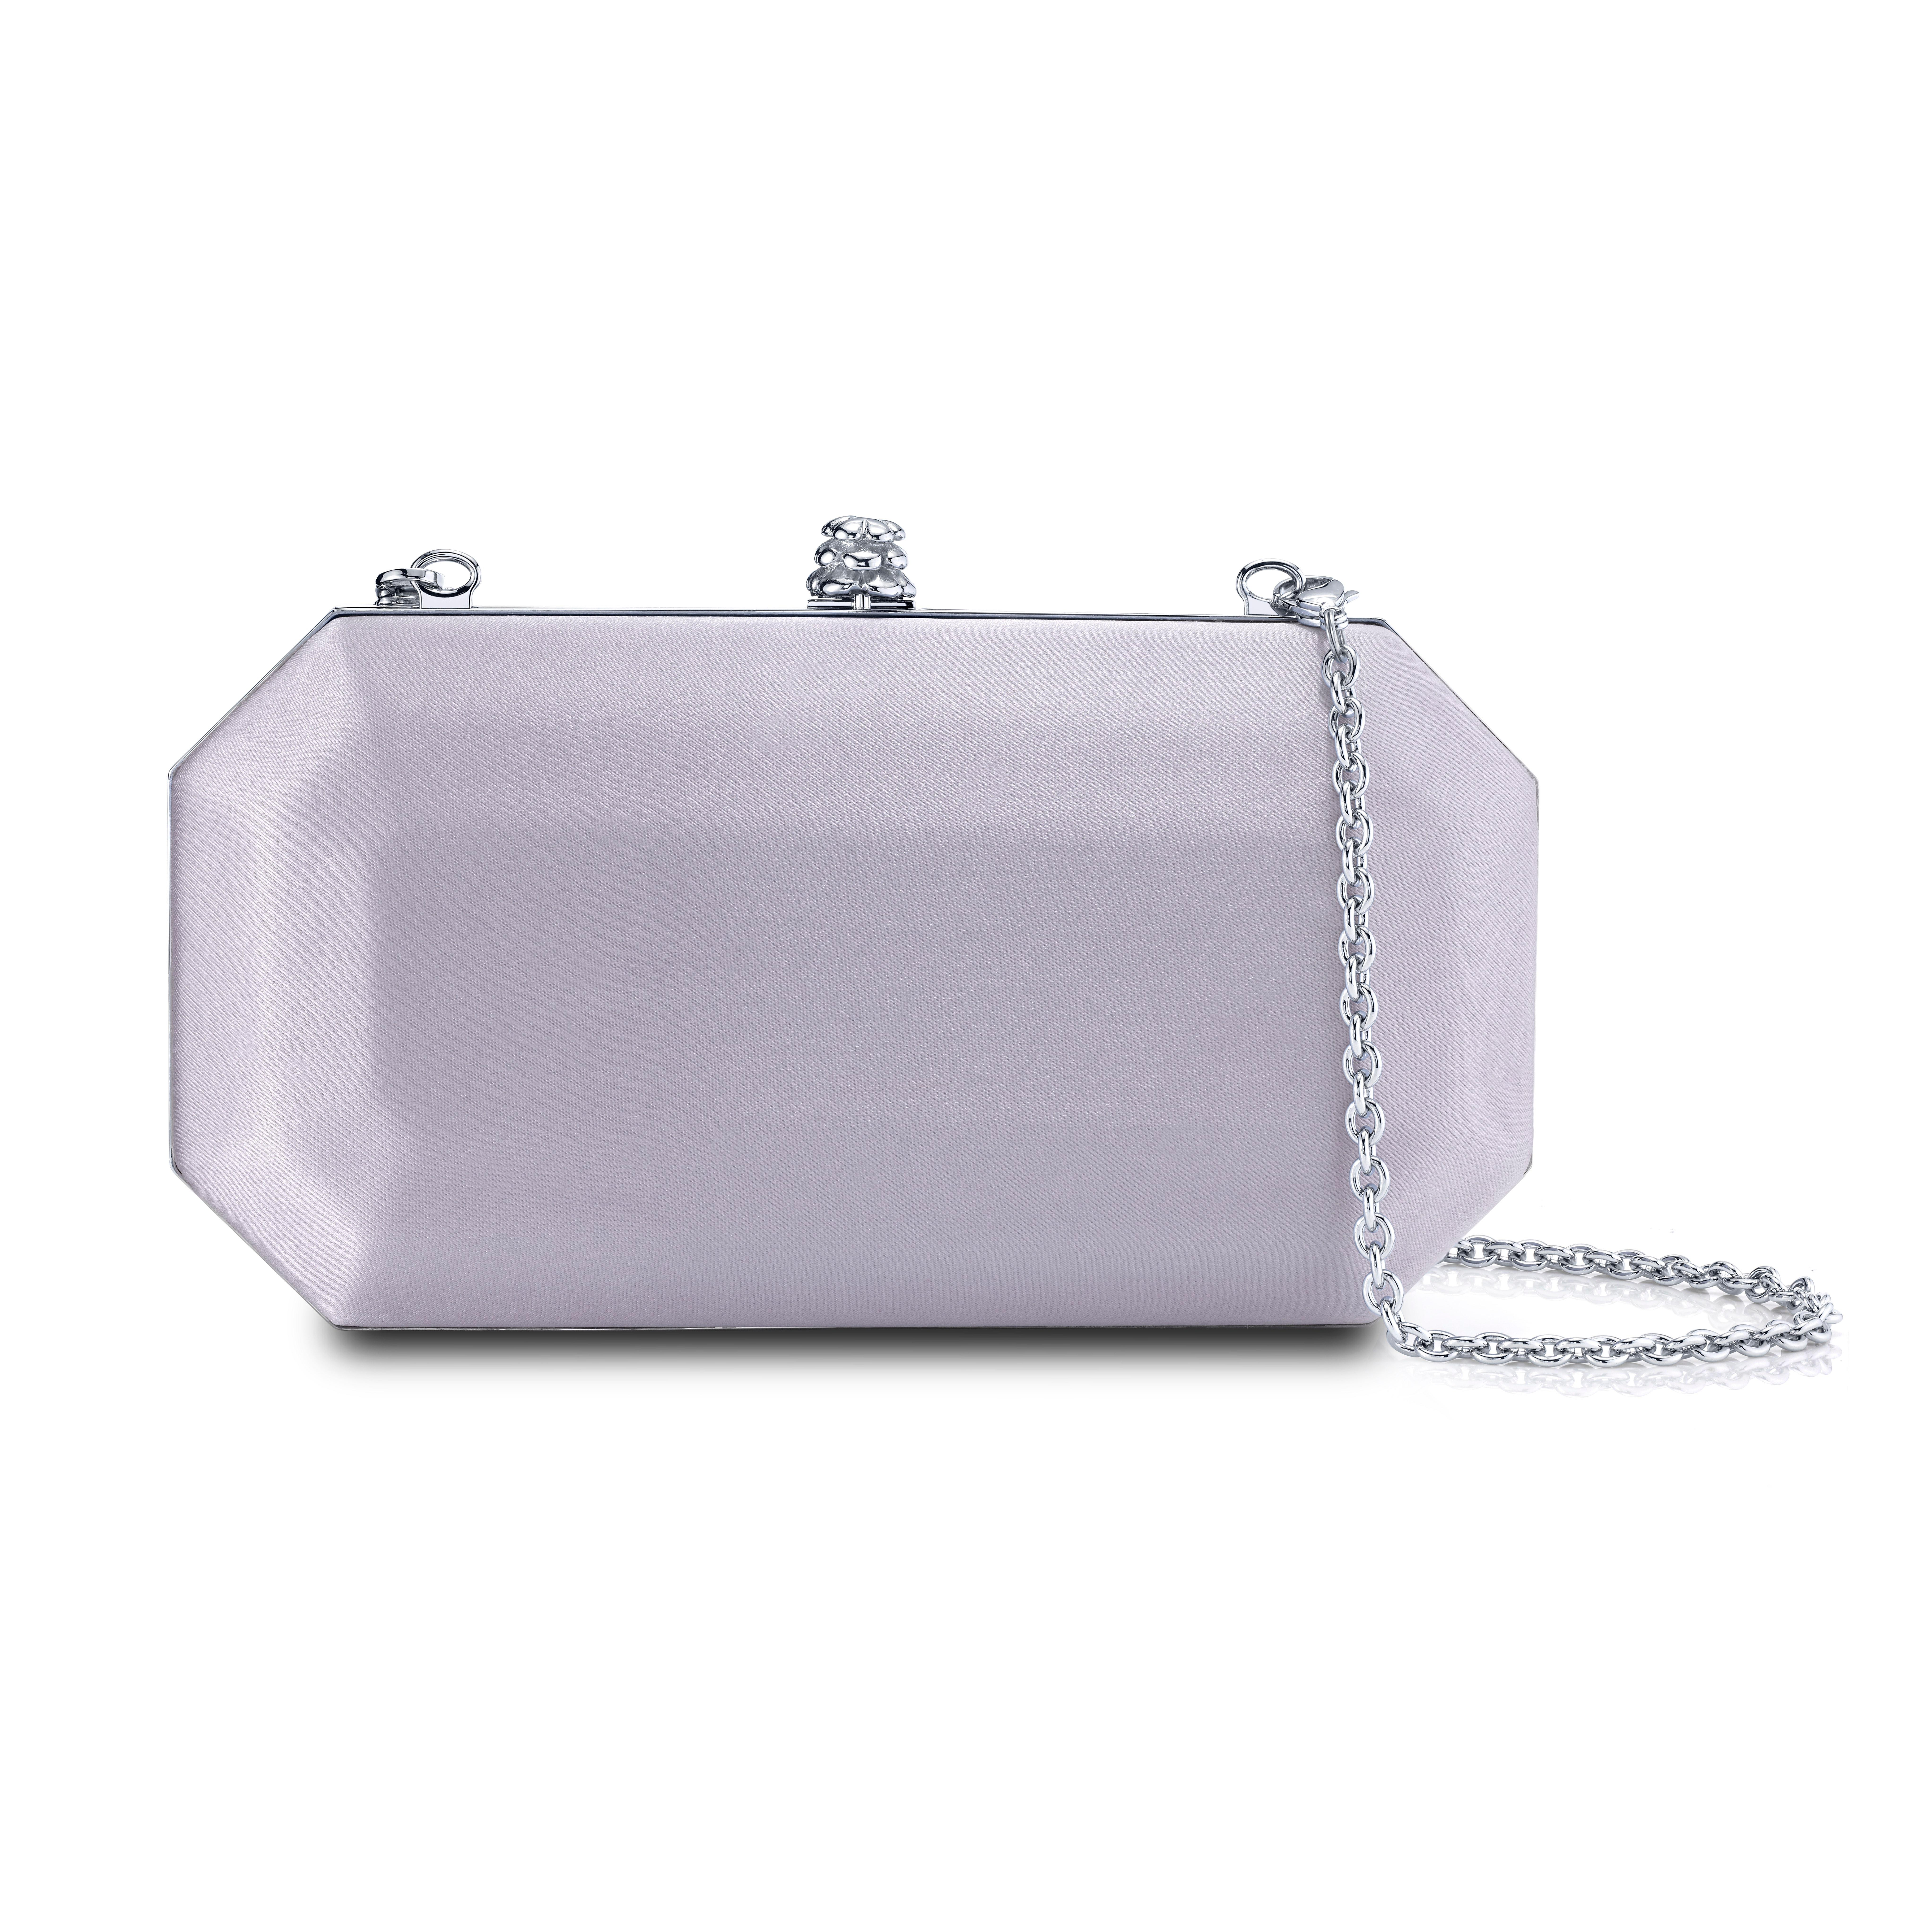 The Perry Small is featured in our Lavender satin with silver hardware. The Perry is a hard-framed clutch designed with interior pockets and an optional silver cross-body chain. It's elegant emerald shape is inspired by Tyler's own engagement ring